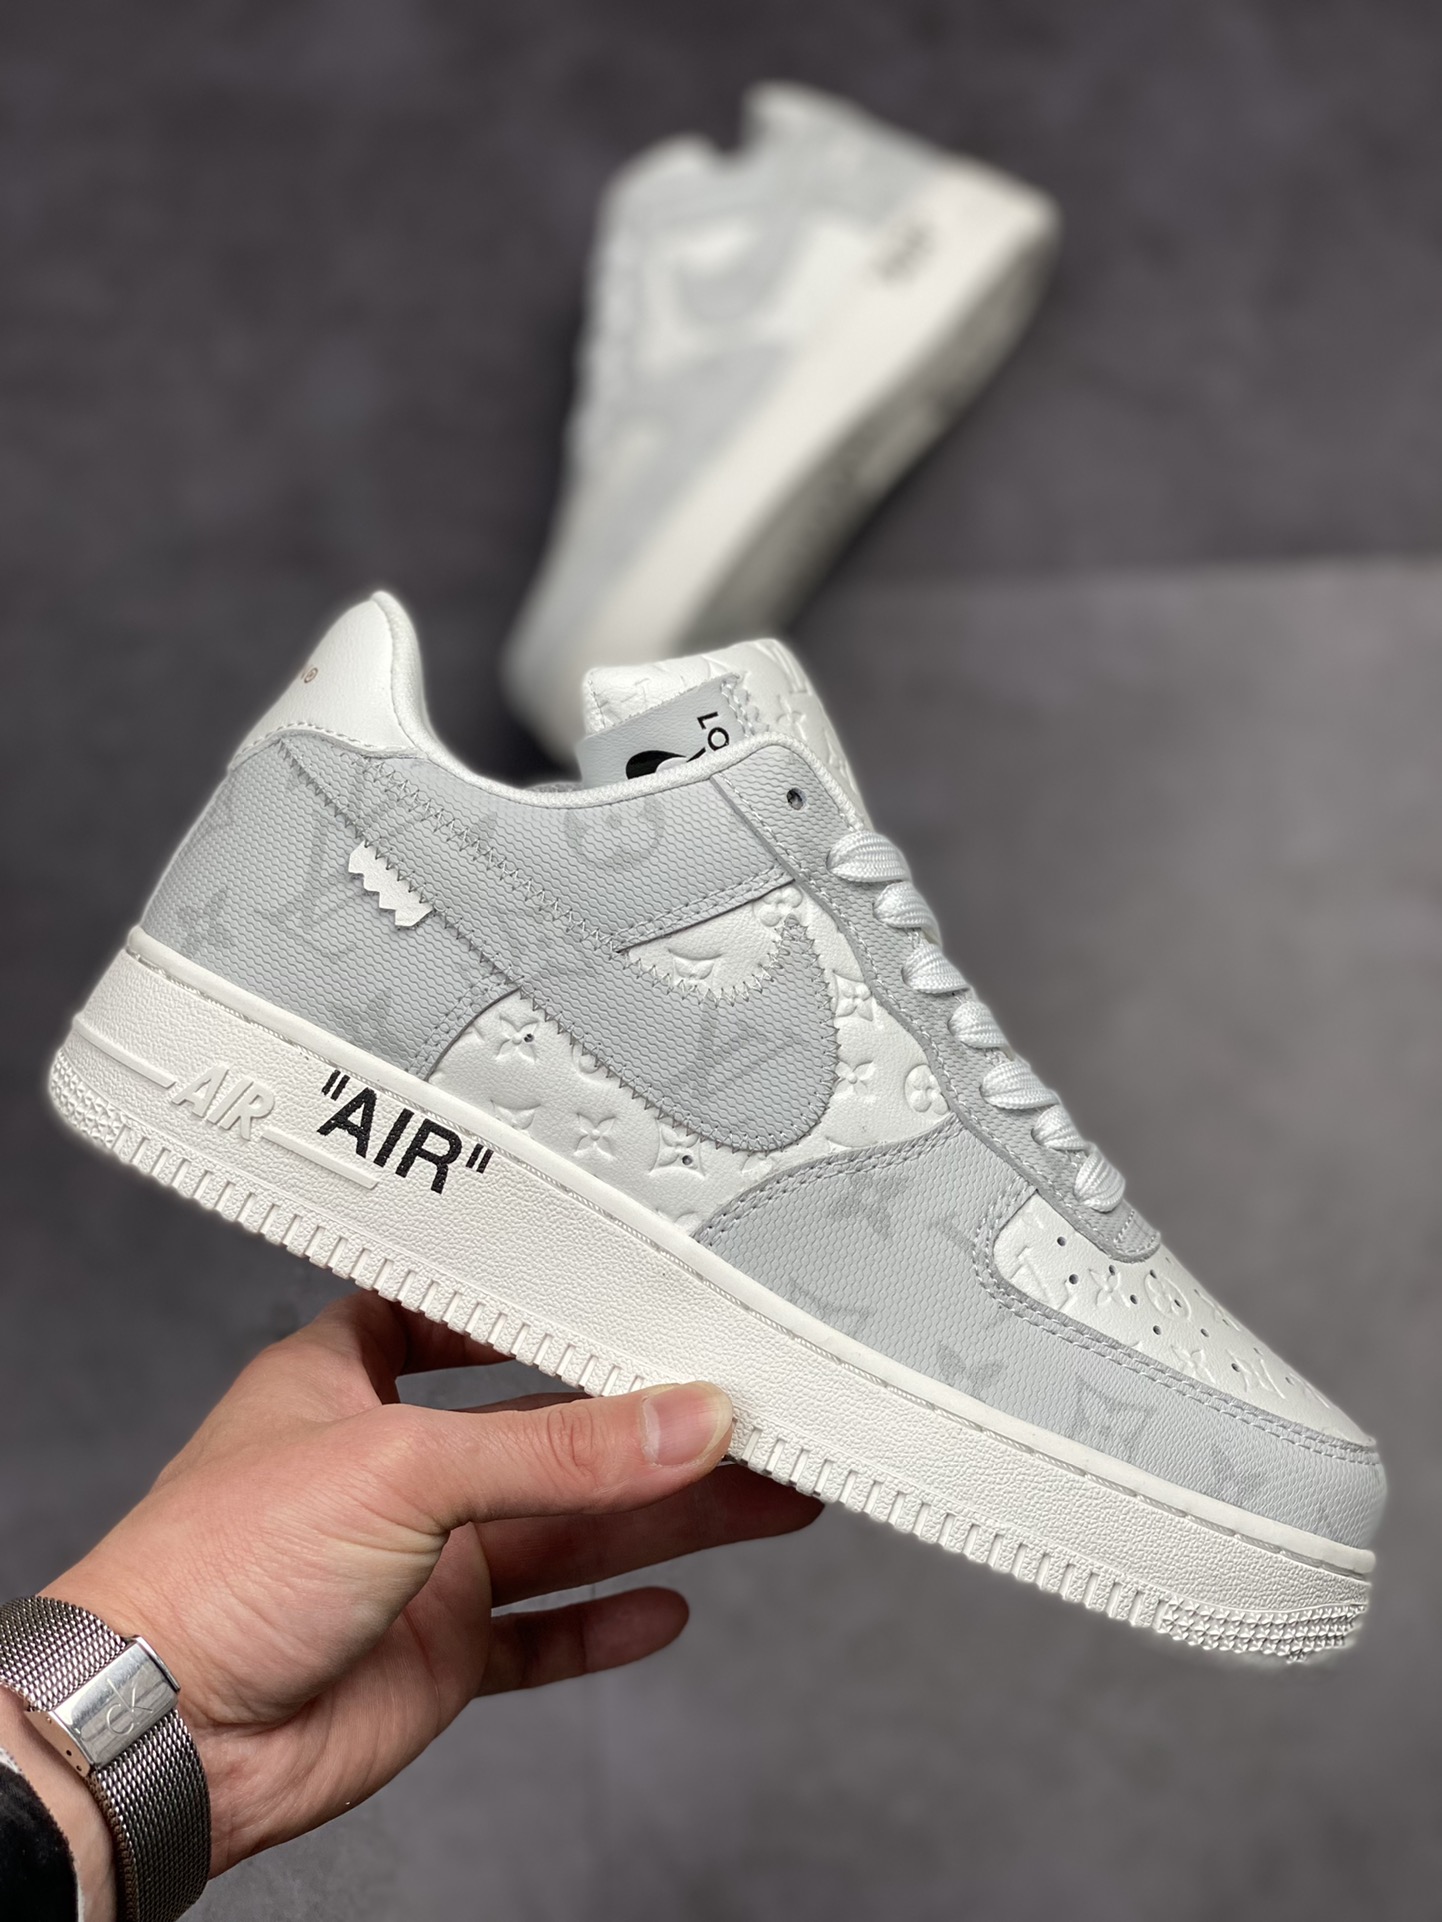 Louis Vuitton x Nike Air Force joint Air Force 1 low-top casual sports sneakers